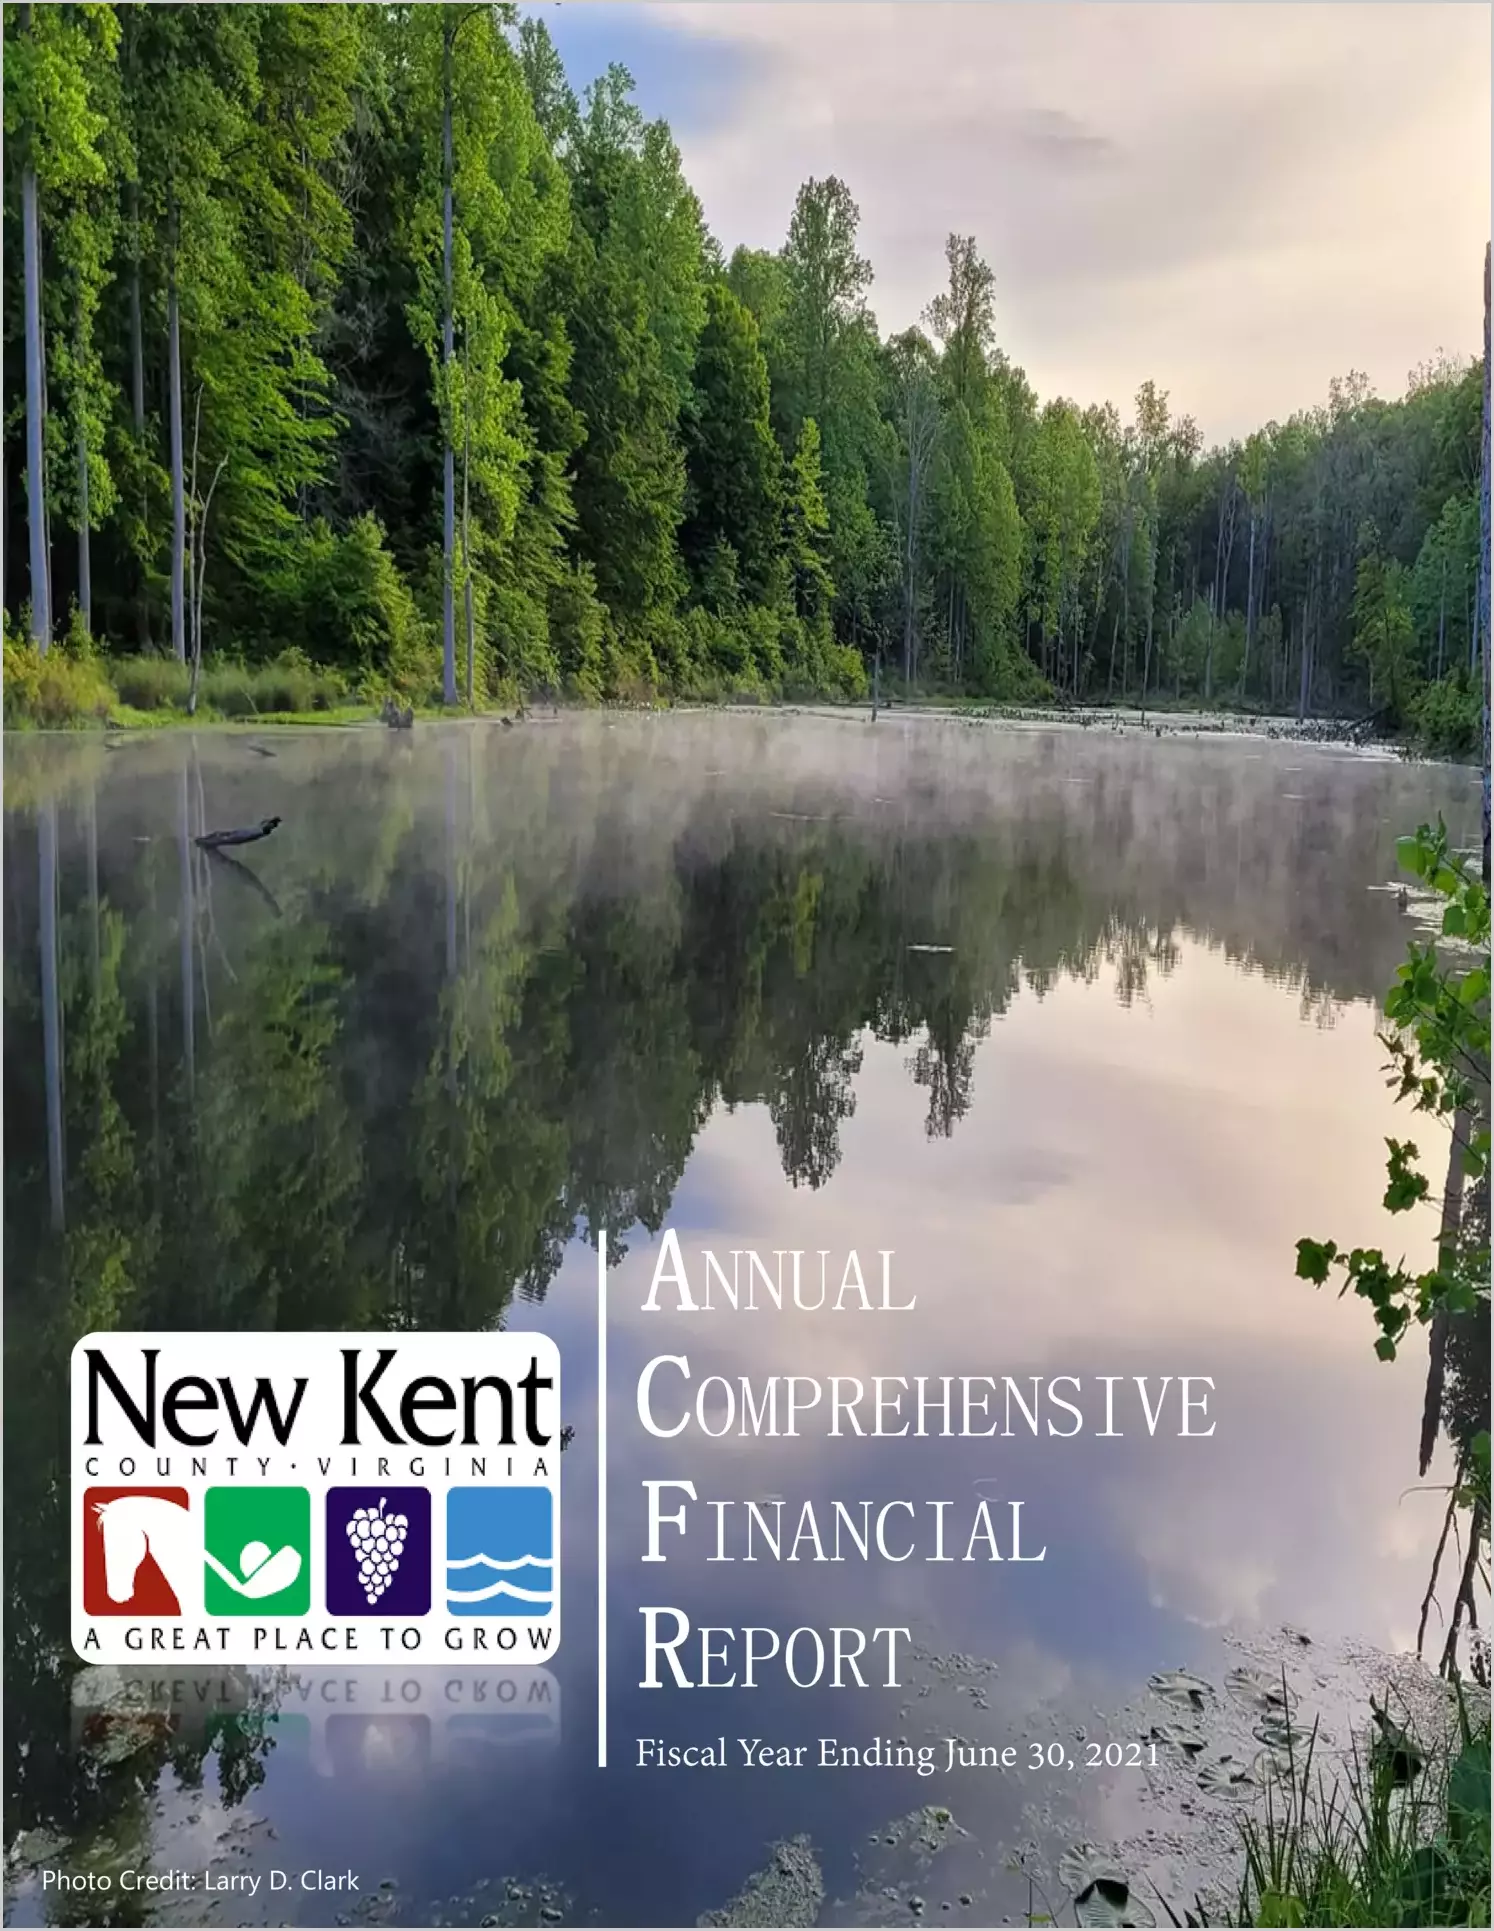 2021 Annual Financial Report for County of New Kent